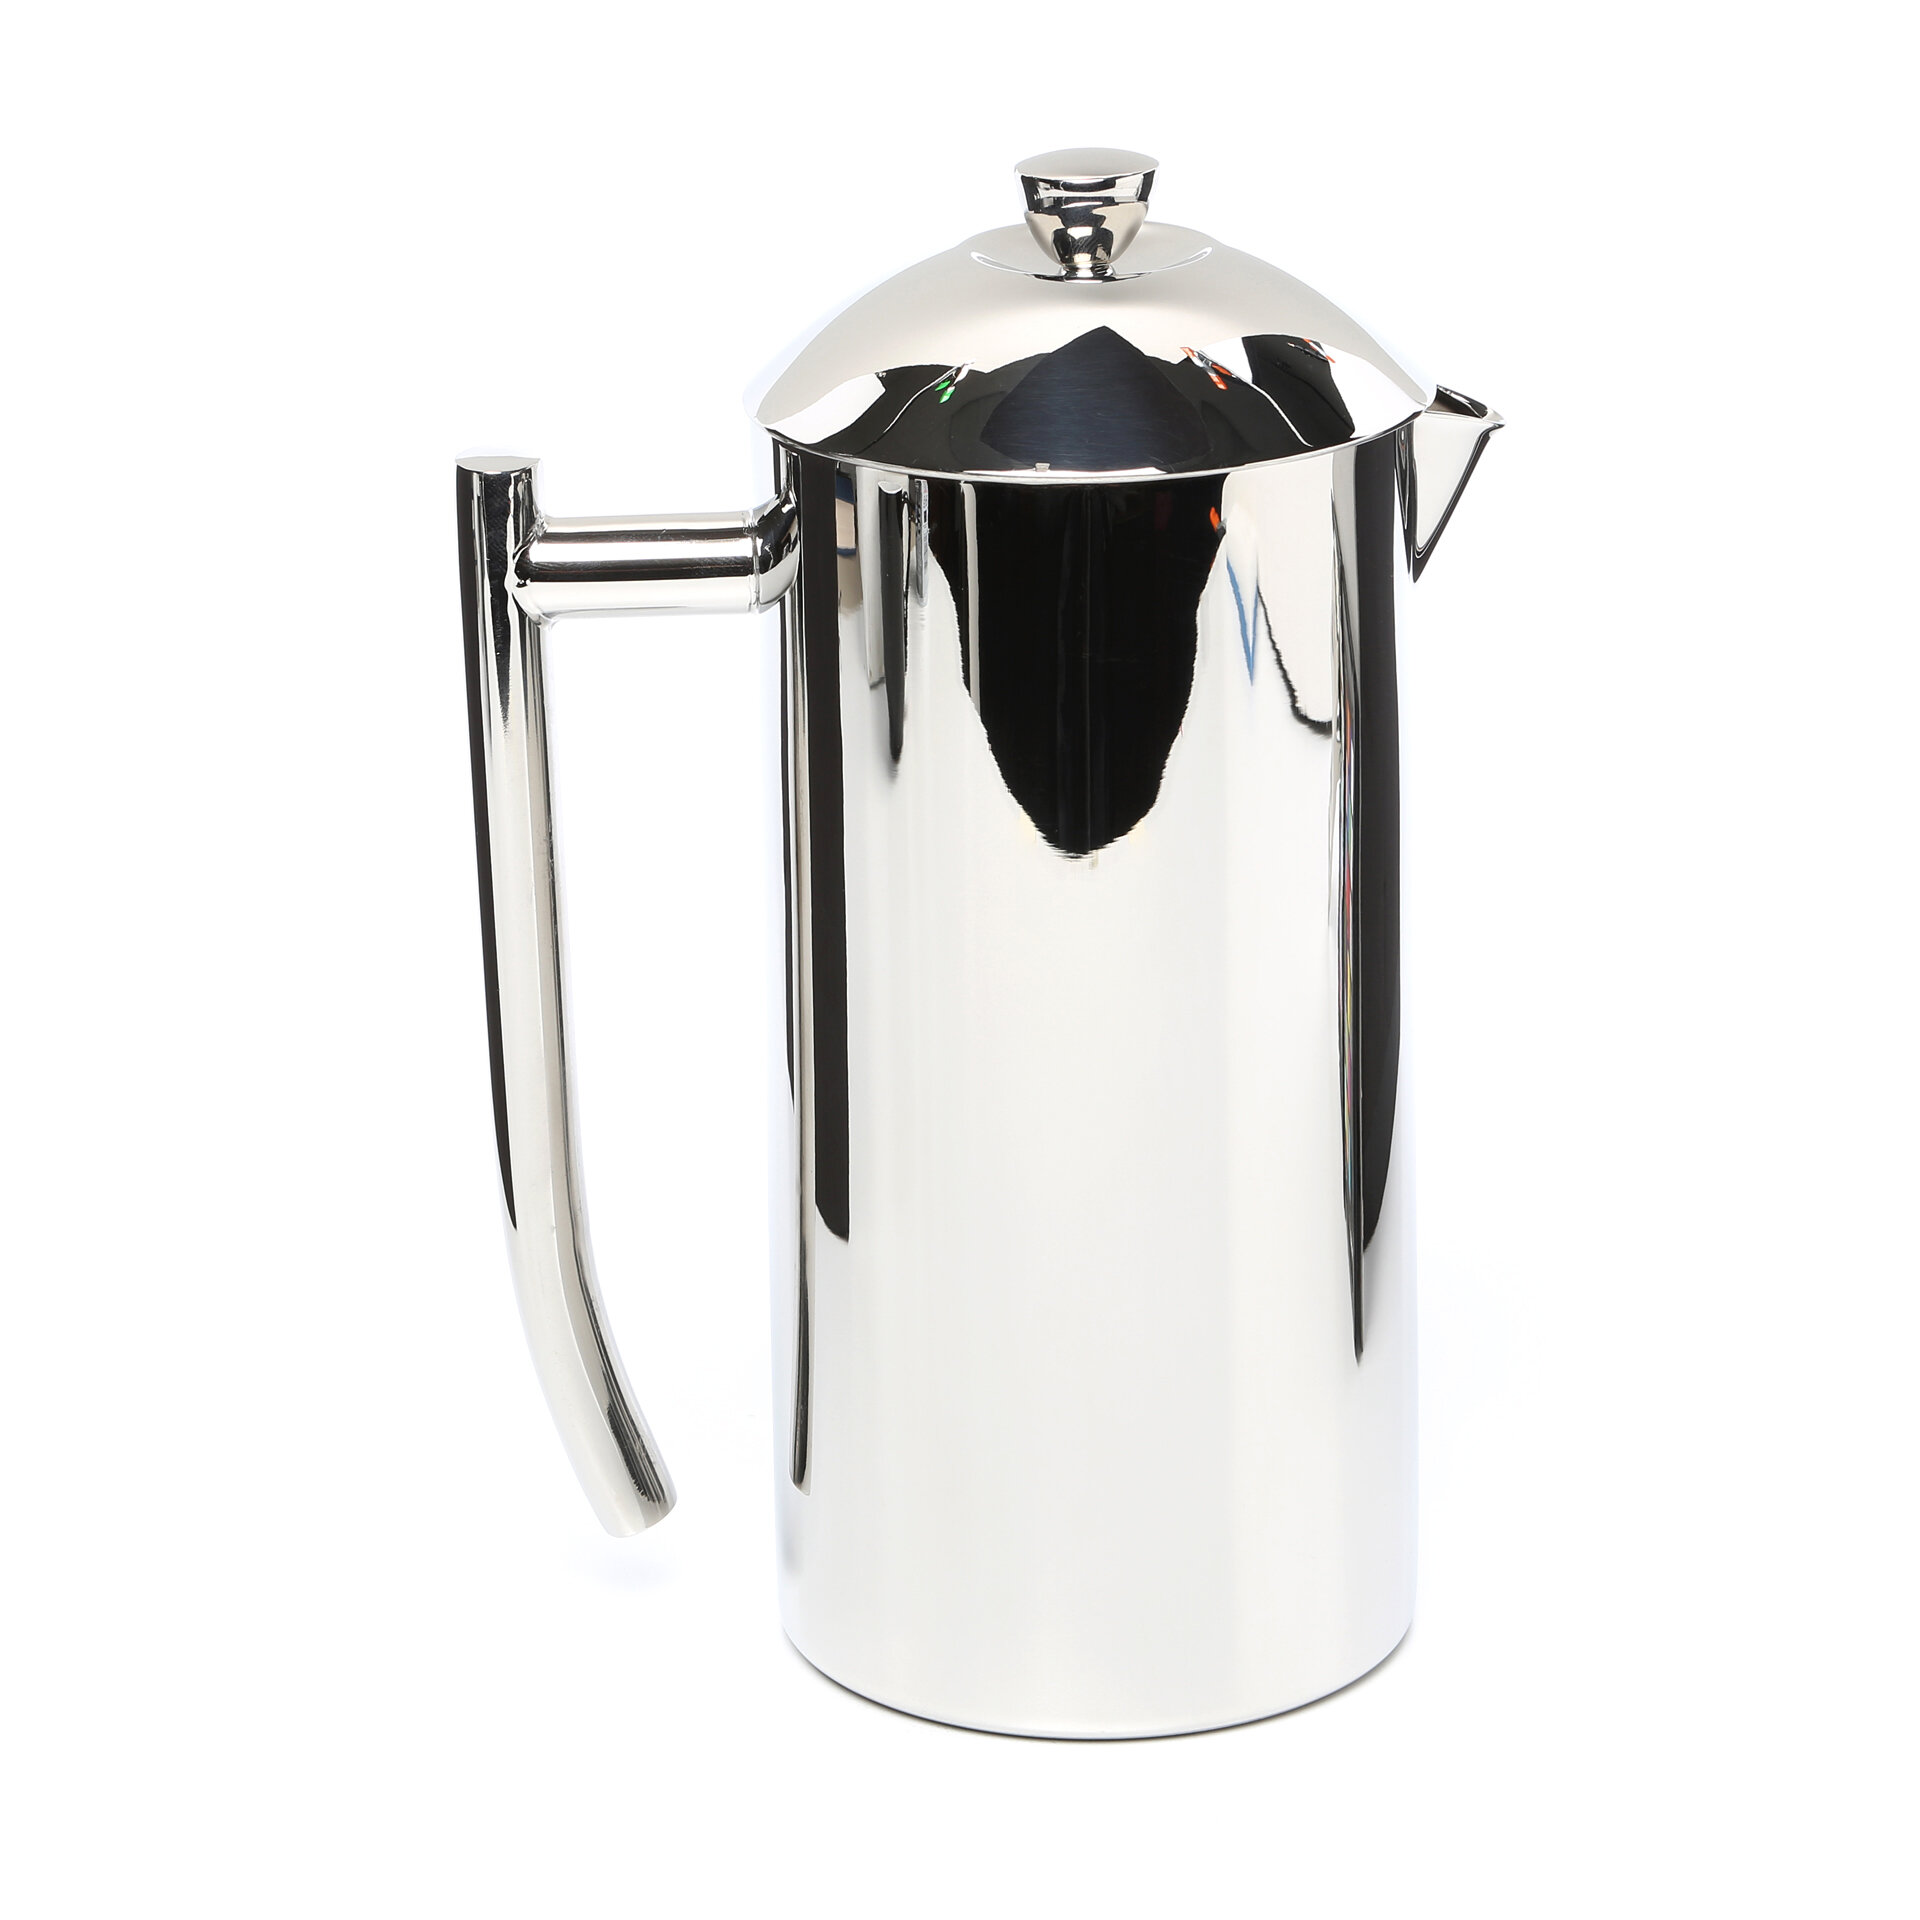 Frieling Double-Walled Stainless Steel French Press Coffee Maker